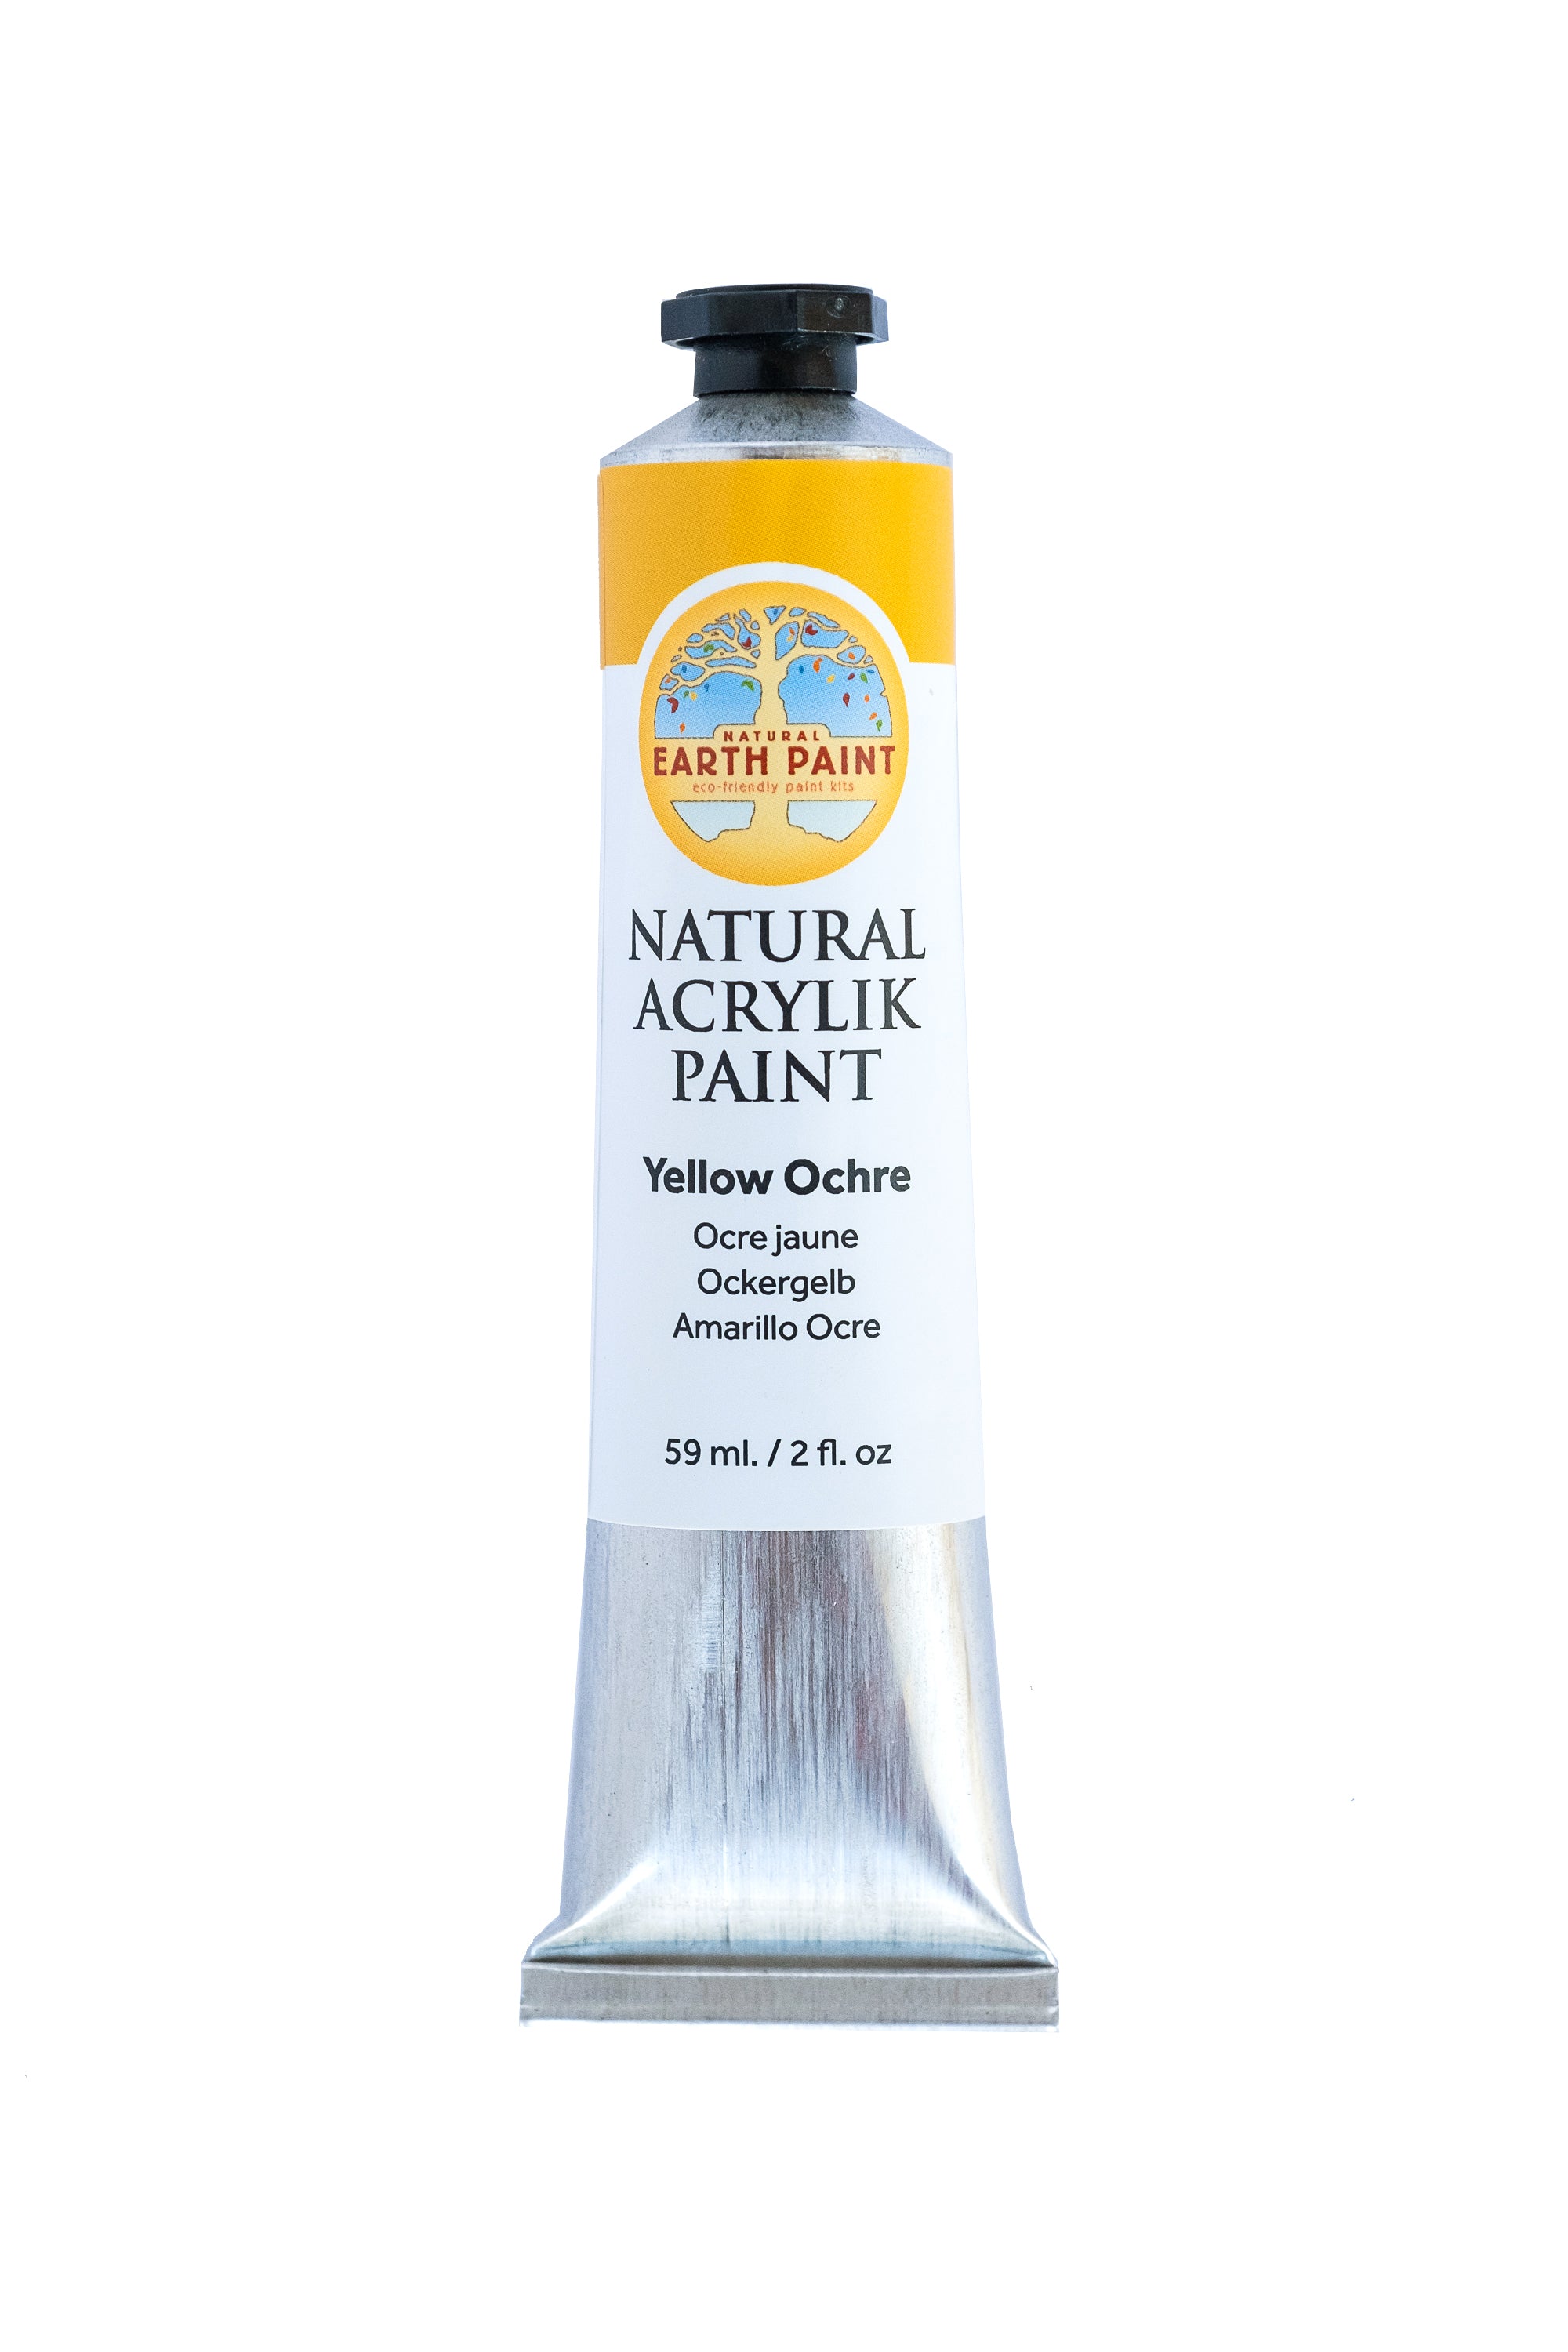 Natural Acrylik Paint™ - Individual Tubes-acrylic, acrylic paint, art, arts and craft, colors from the earth, earth colors, earth paint, earth pigments, eco art supplies, Eco Artist Paints, eco friendly paints, eco-friendly art supplies, eco-friendly paint, Fine Art Supplies Products, natural acrylic, natural artist paints, natural earth colors, natural paint, natural paints, non-toxic paint, nontoxic artist paints, nontoxic artist supplies, nontoxic paints, paint, sustainable art supplies-Yellow Ochre-Natu